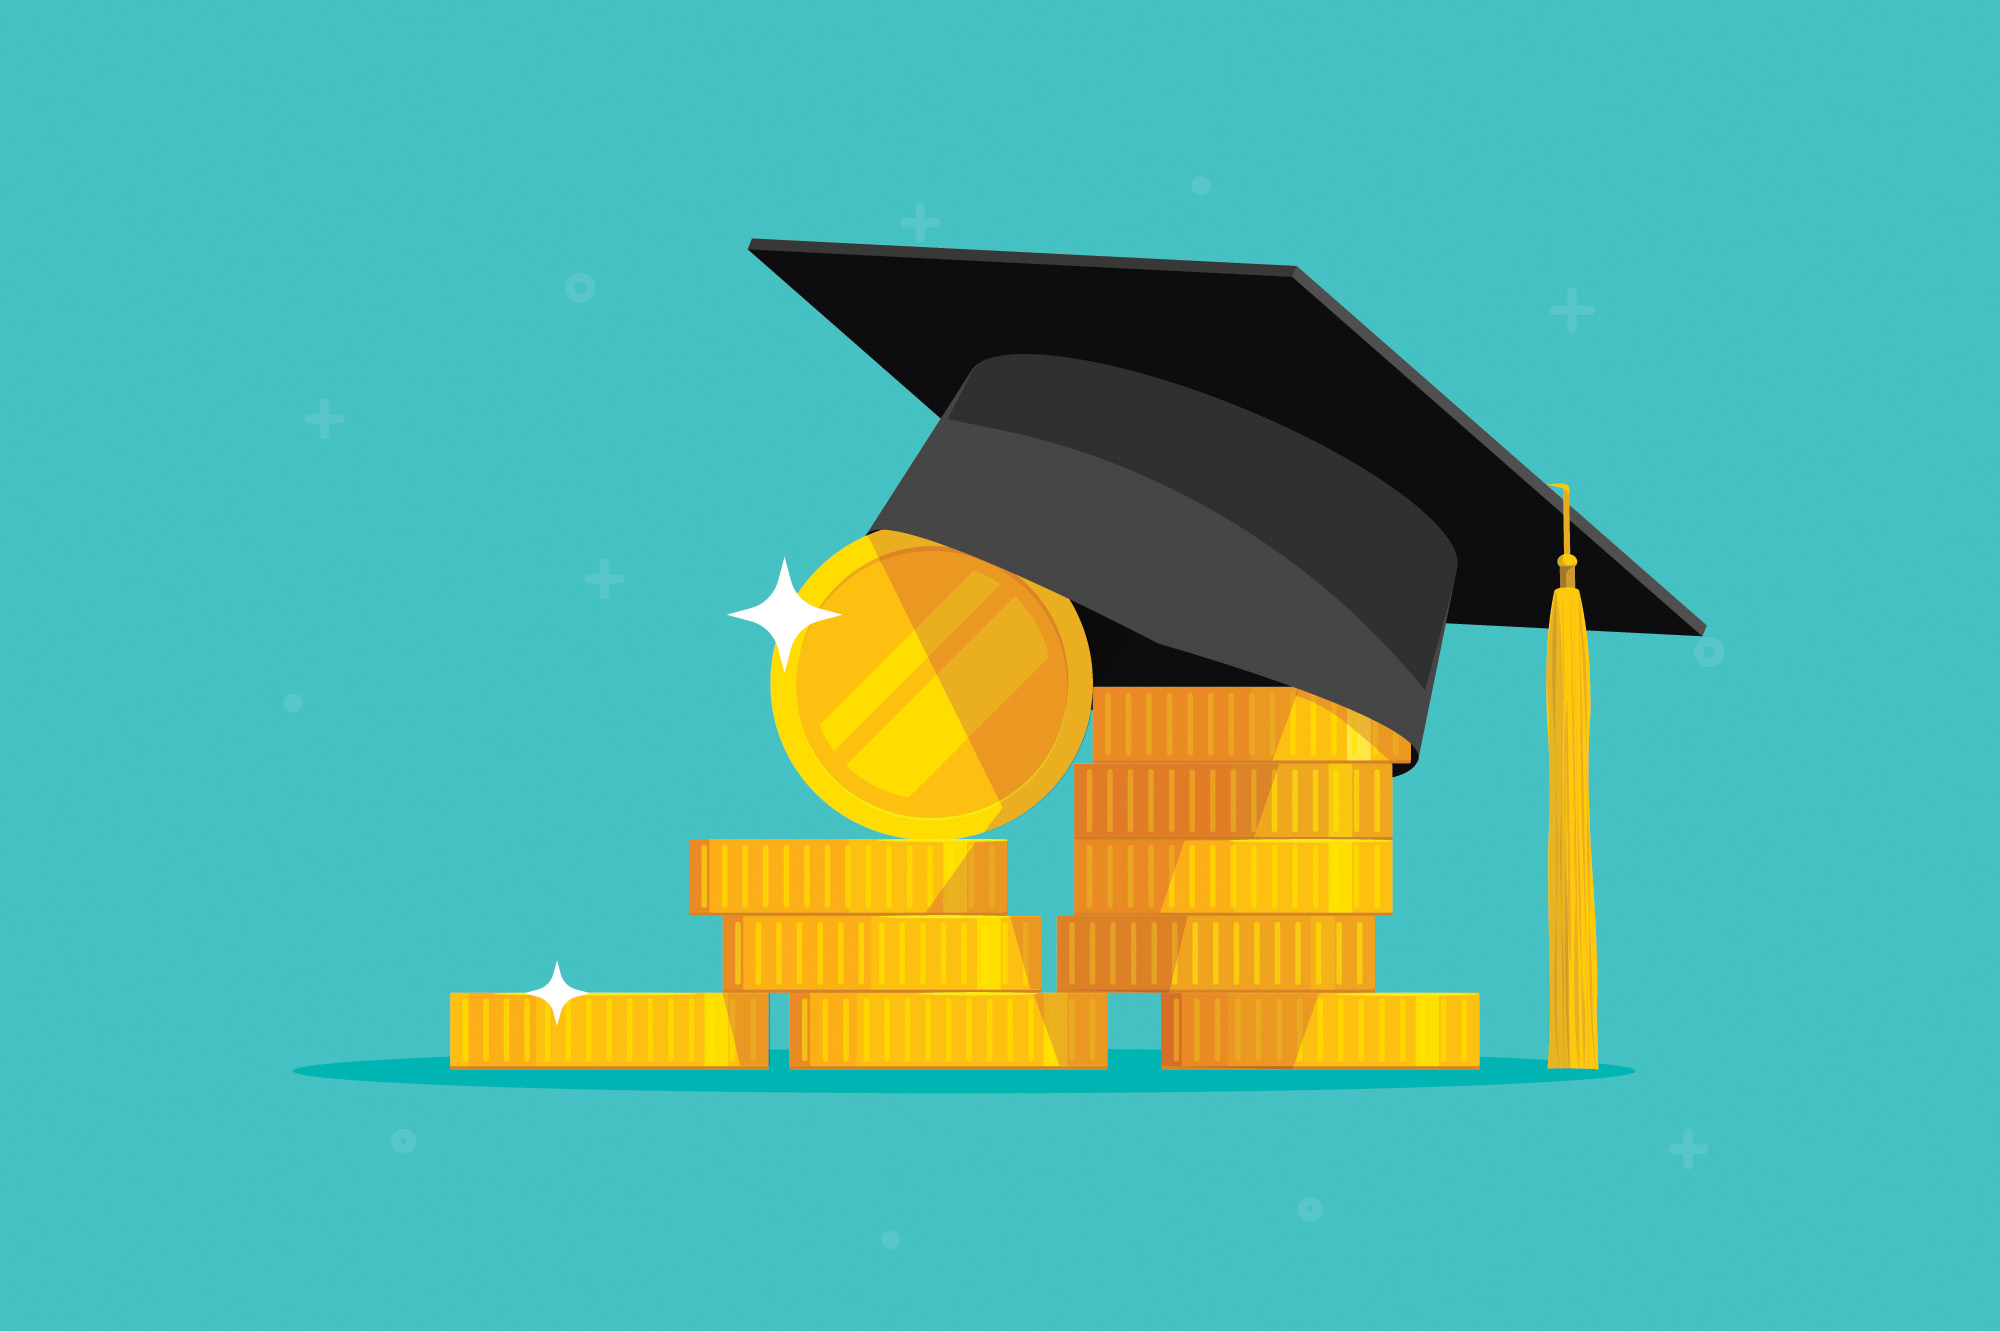 An illustration of a pile of coins topped by a graduation cap.